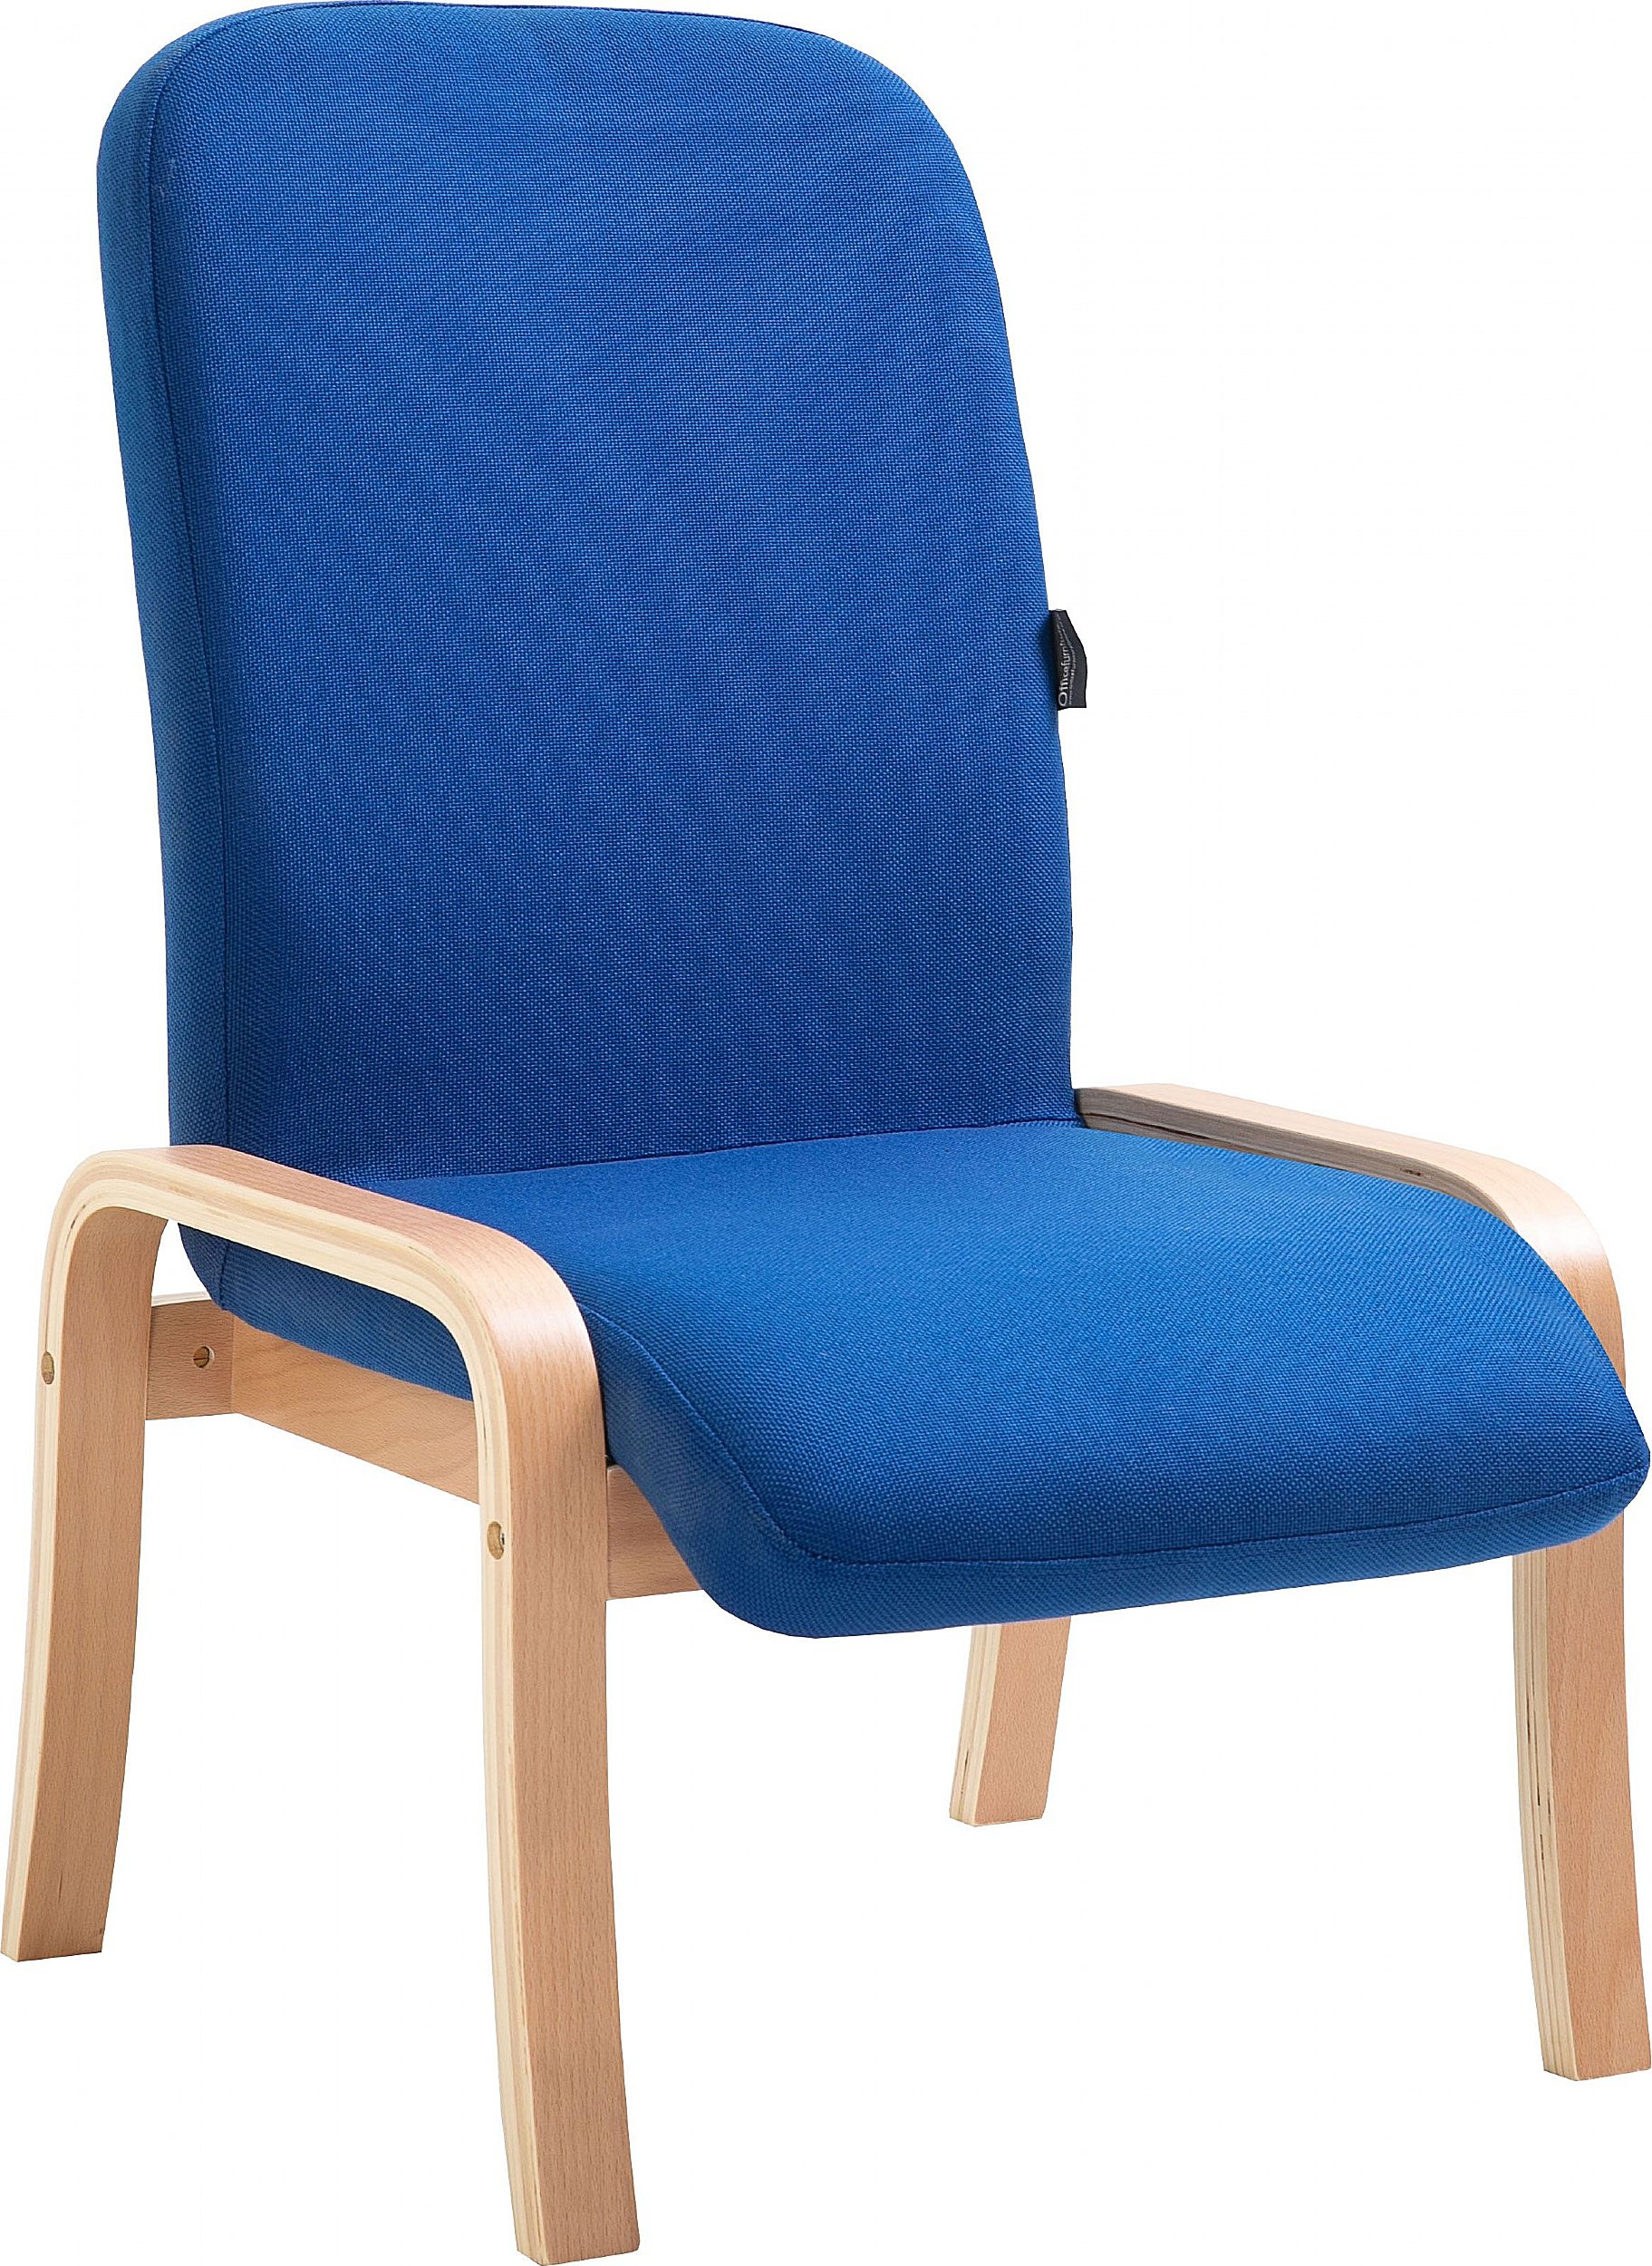 Meeting Room/Reception Chair Blue Wooden Frame 